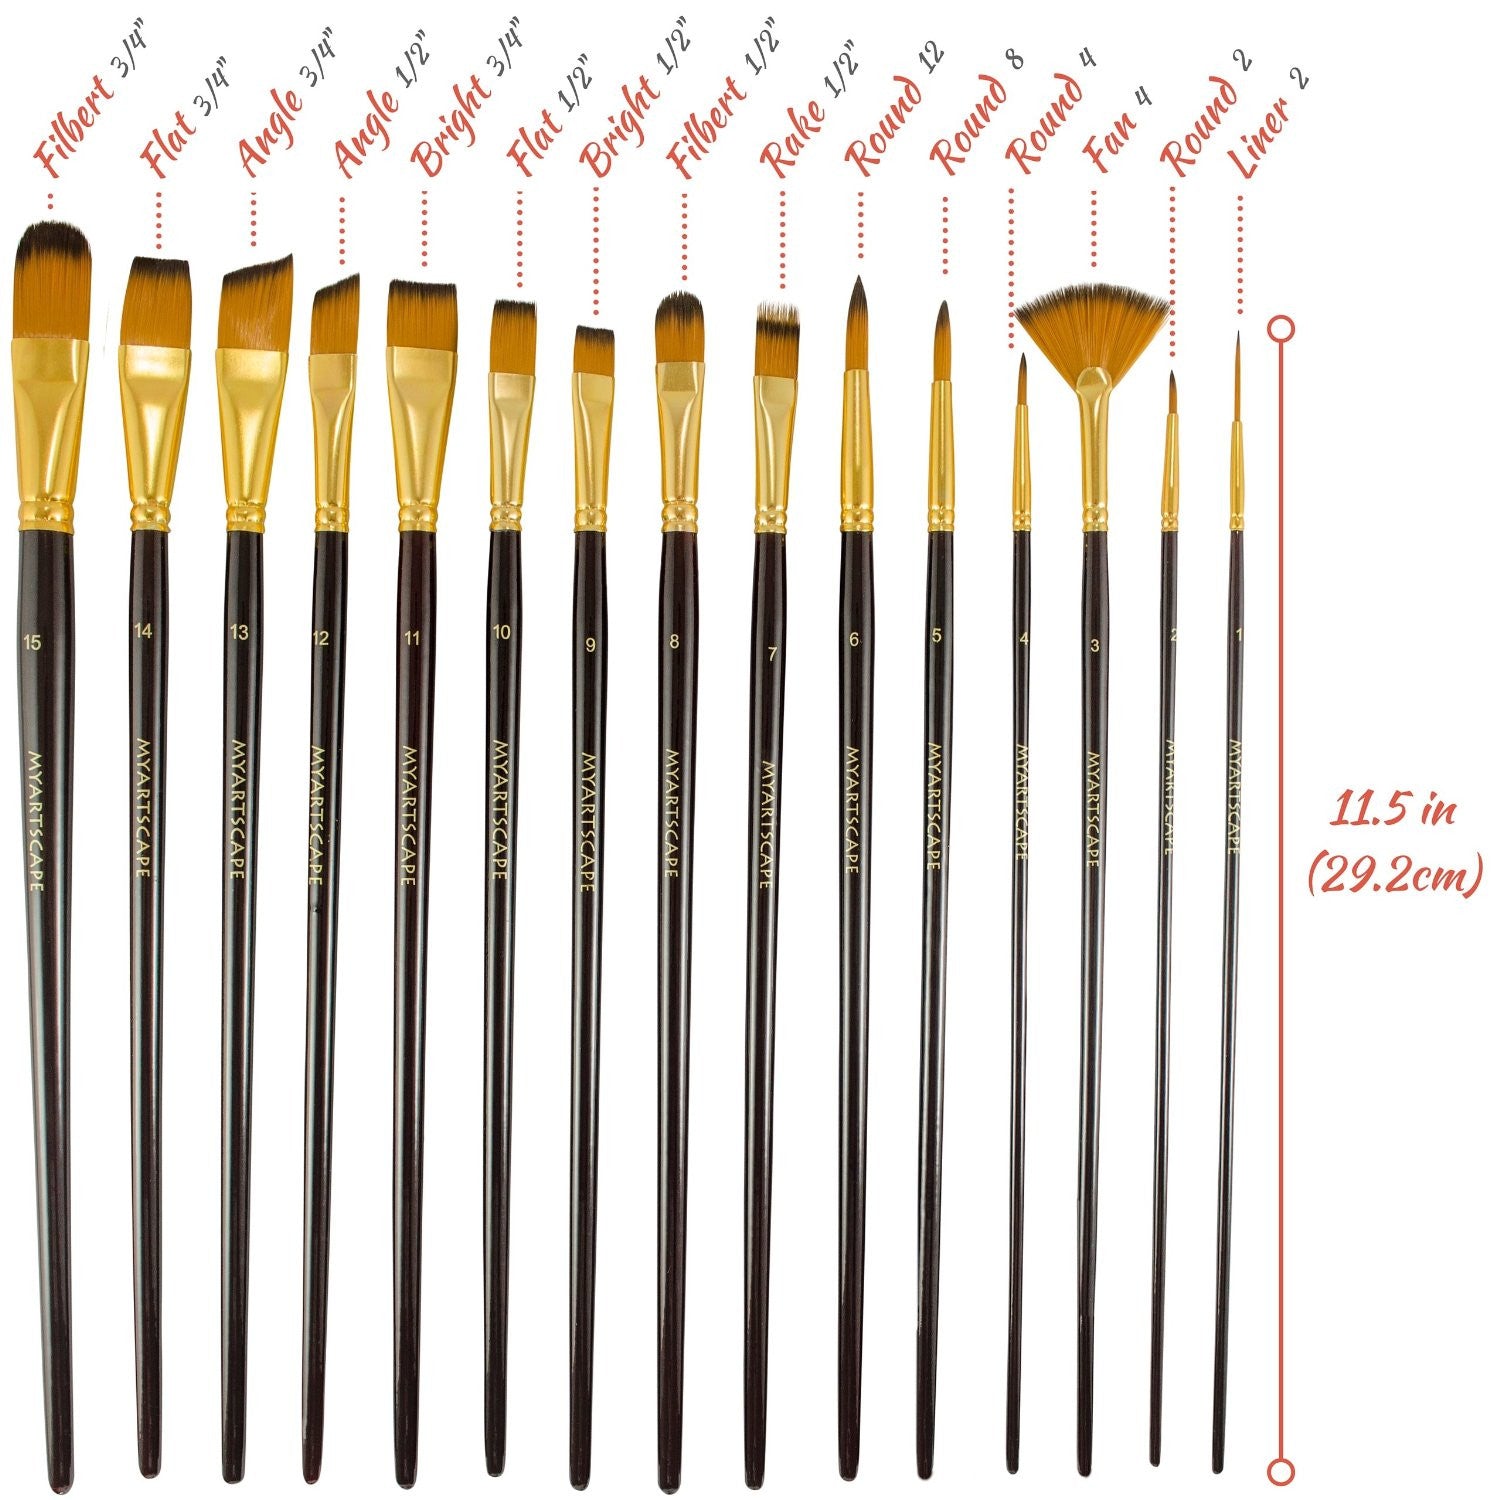 16 Pieces Professional Paint Brush Set Arts Crafts Supplies Painting Brushes Black